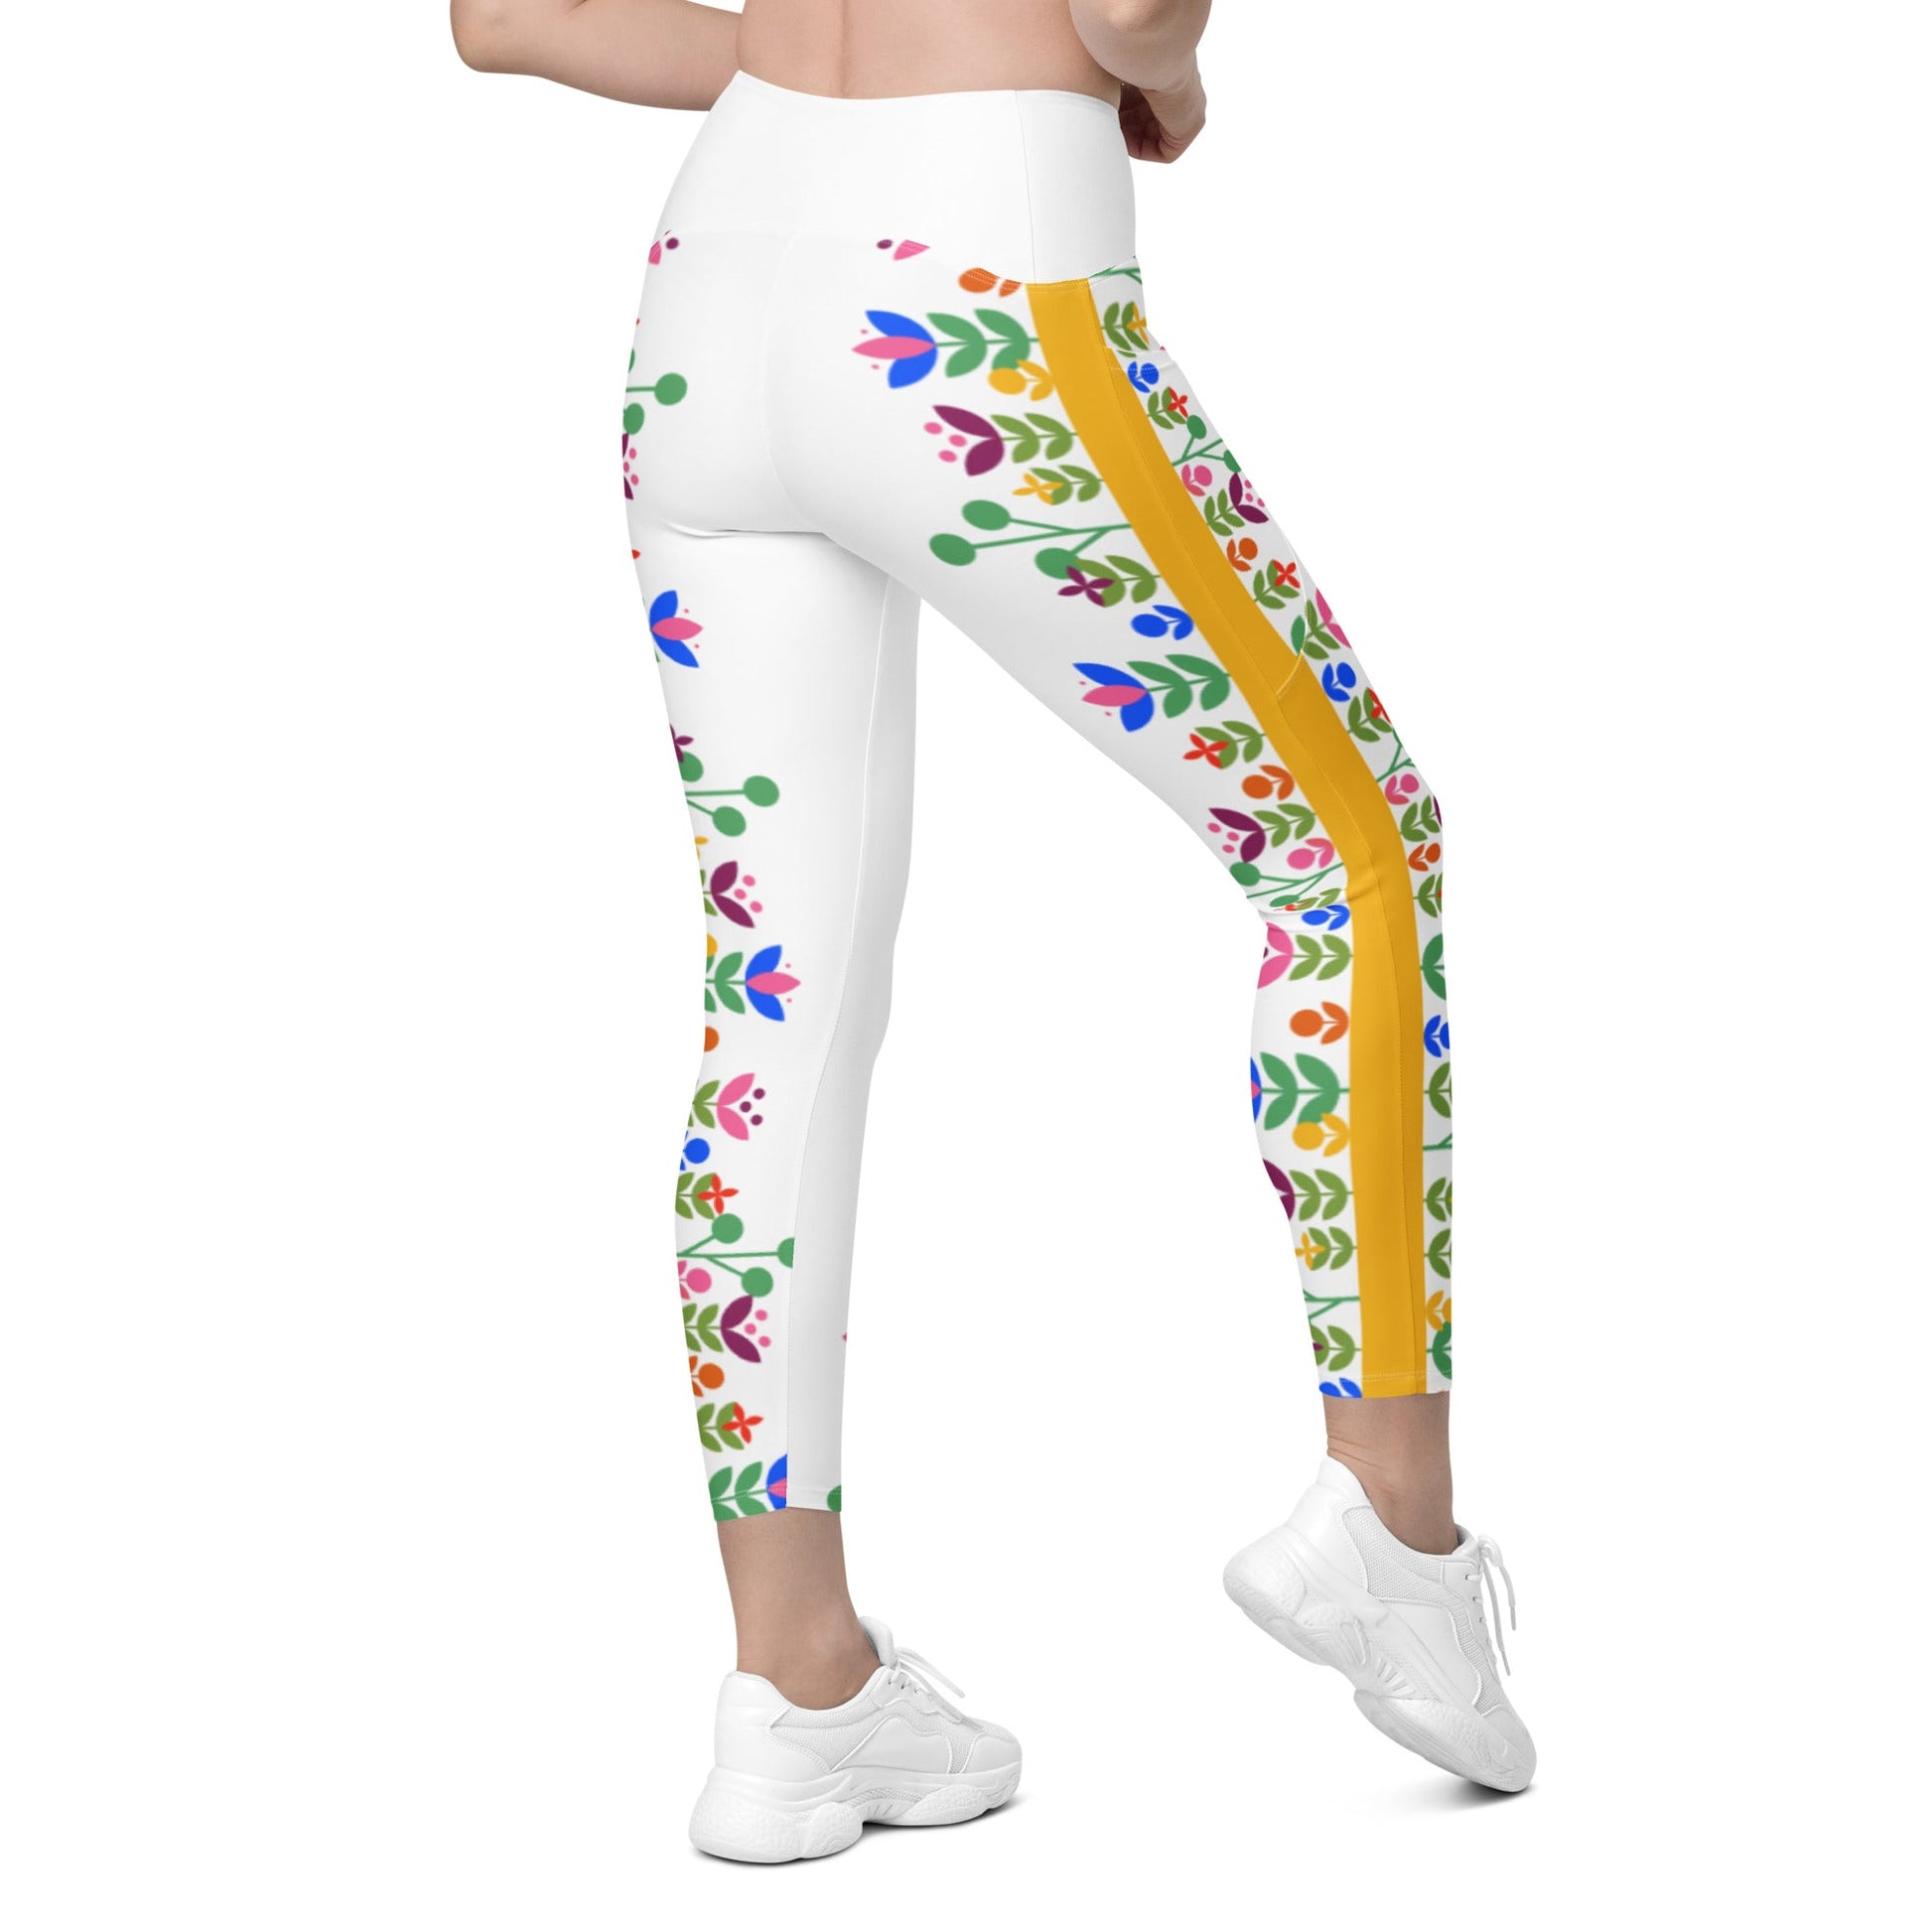 Small World Leggings with pockets